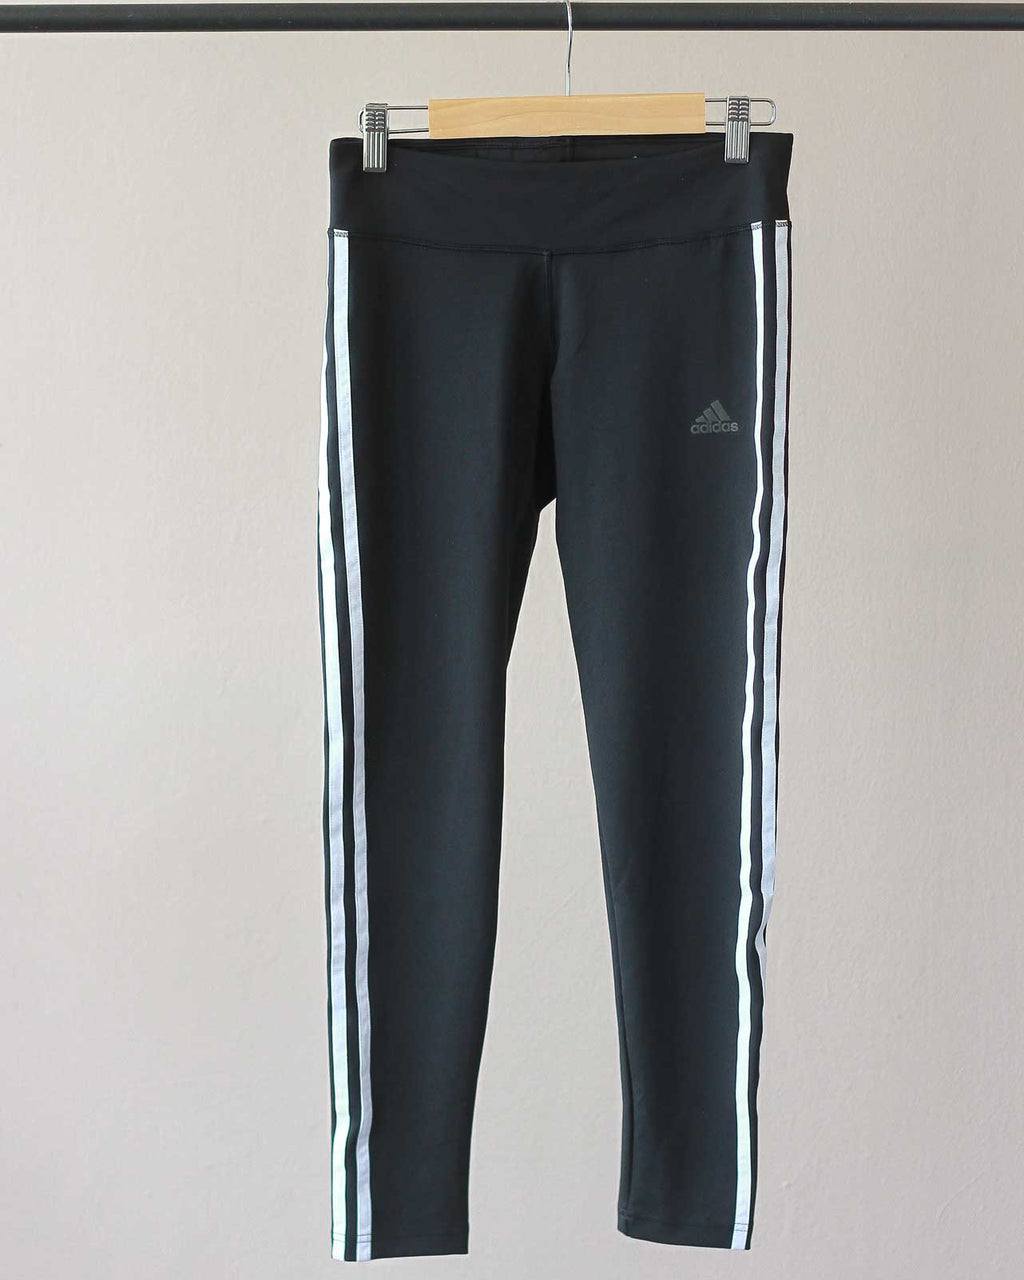 Adidas Climalite 3/4 Leggings – Second Other